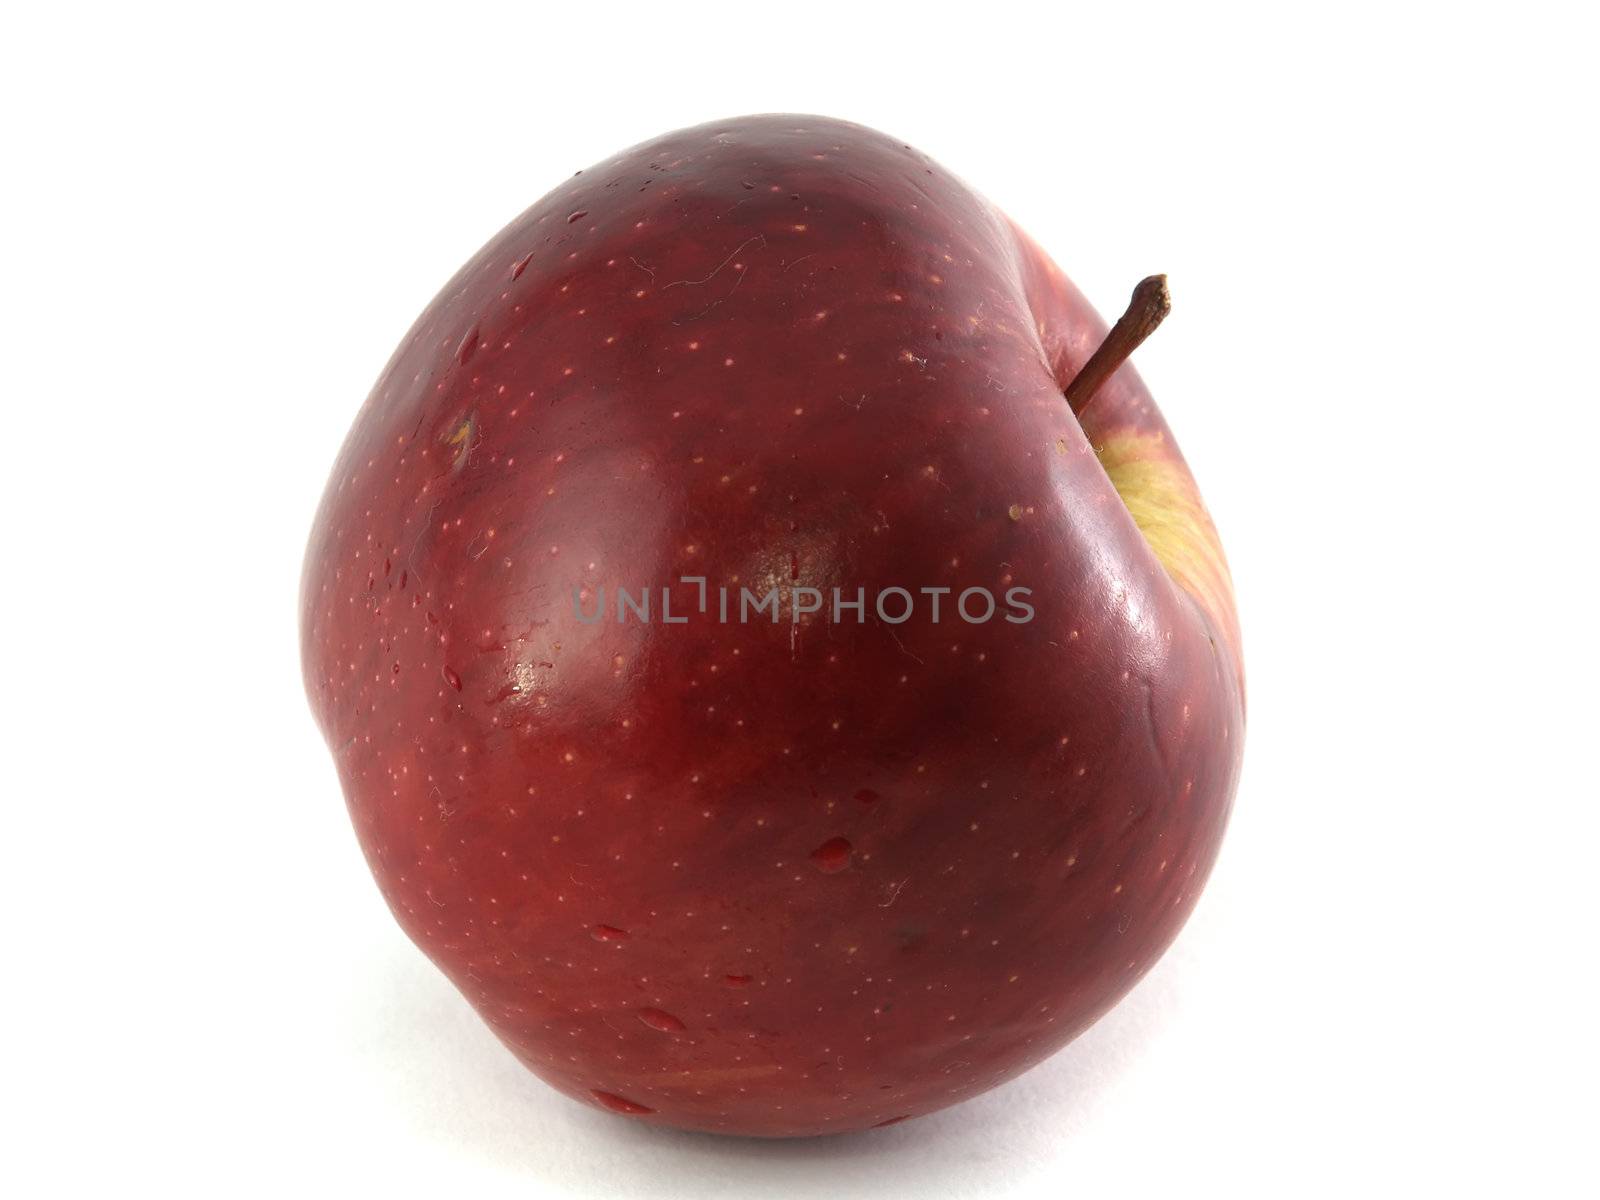 An apple variety called Red Cheaf isolated on white.